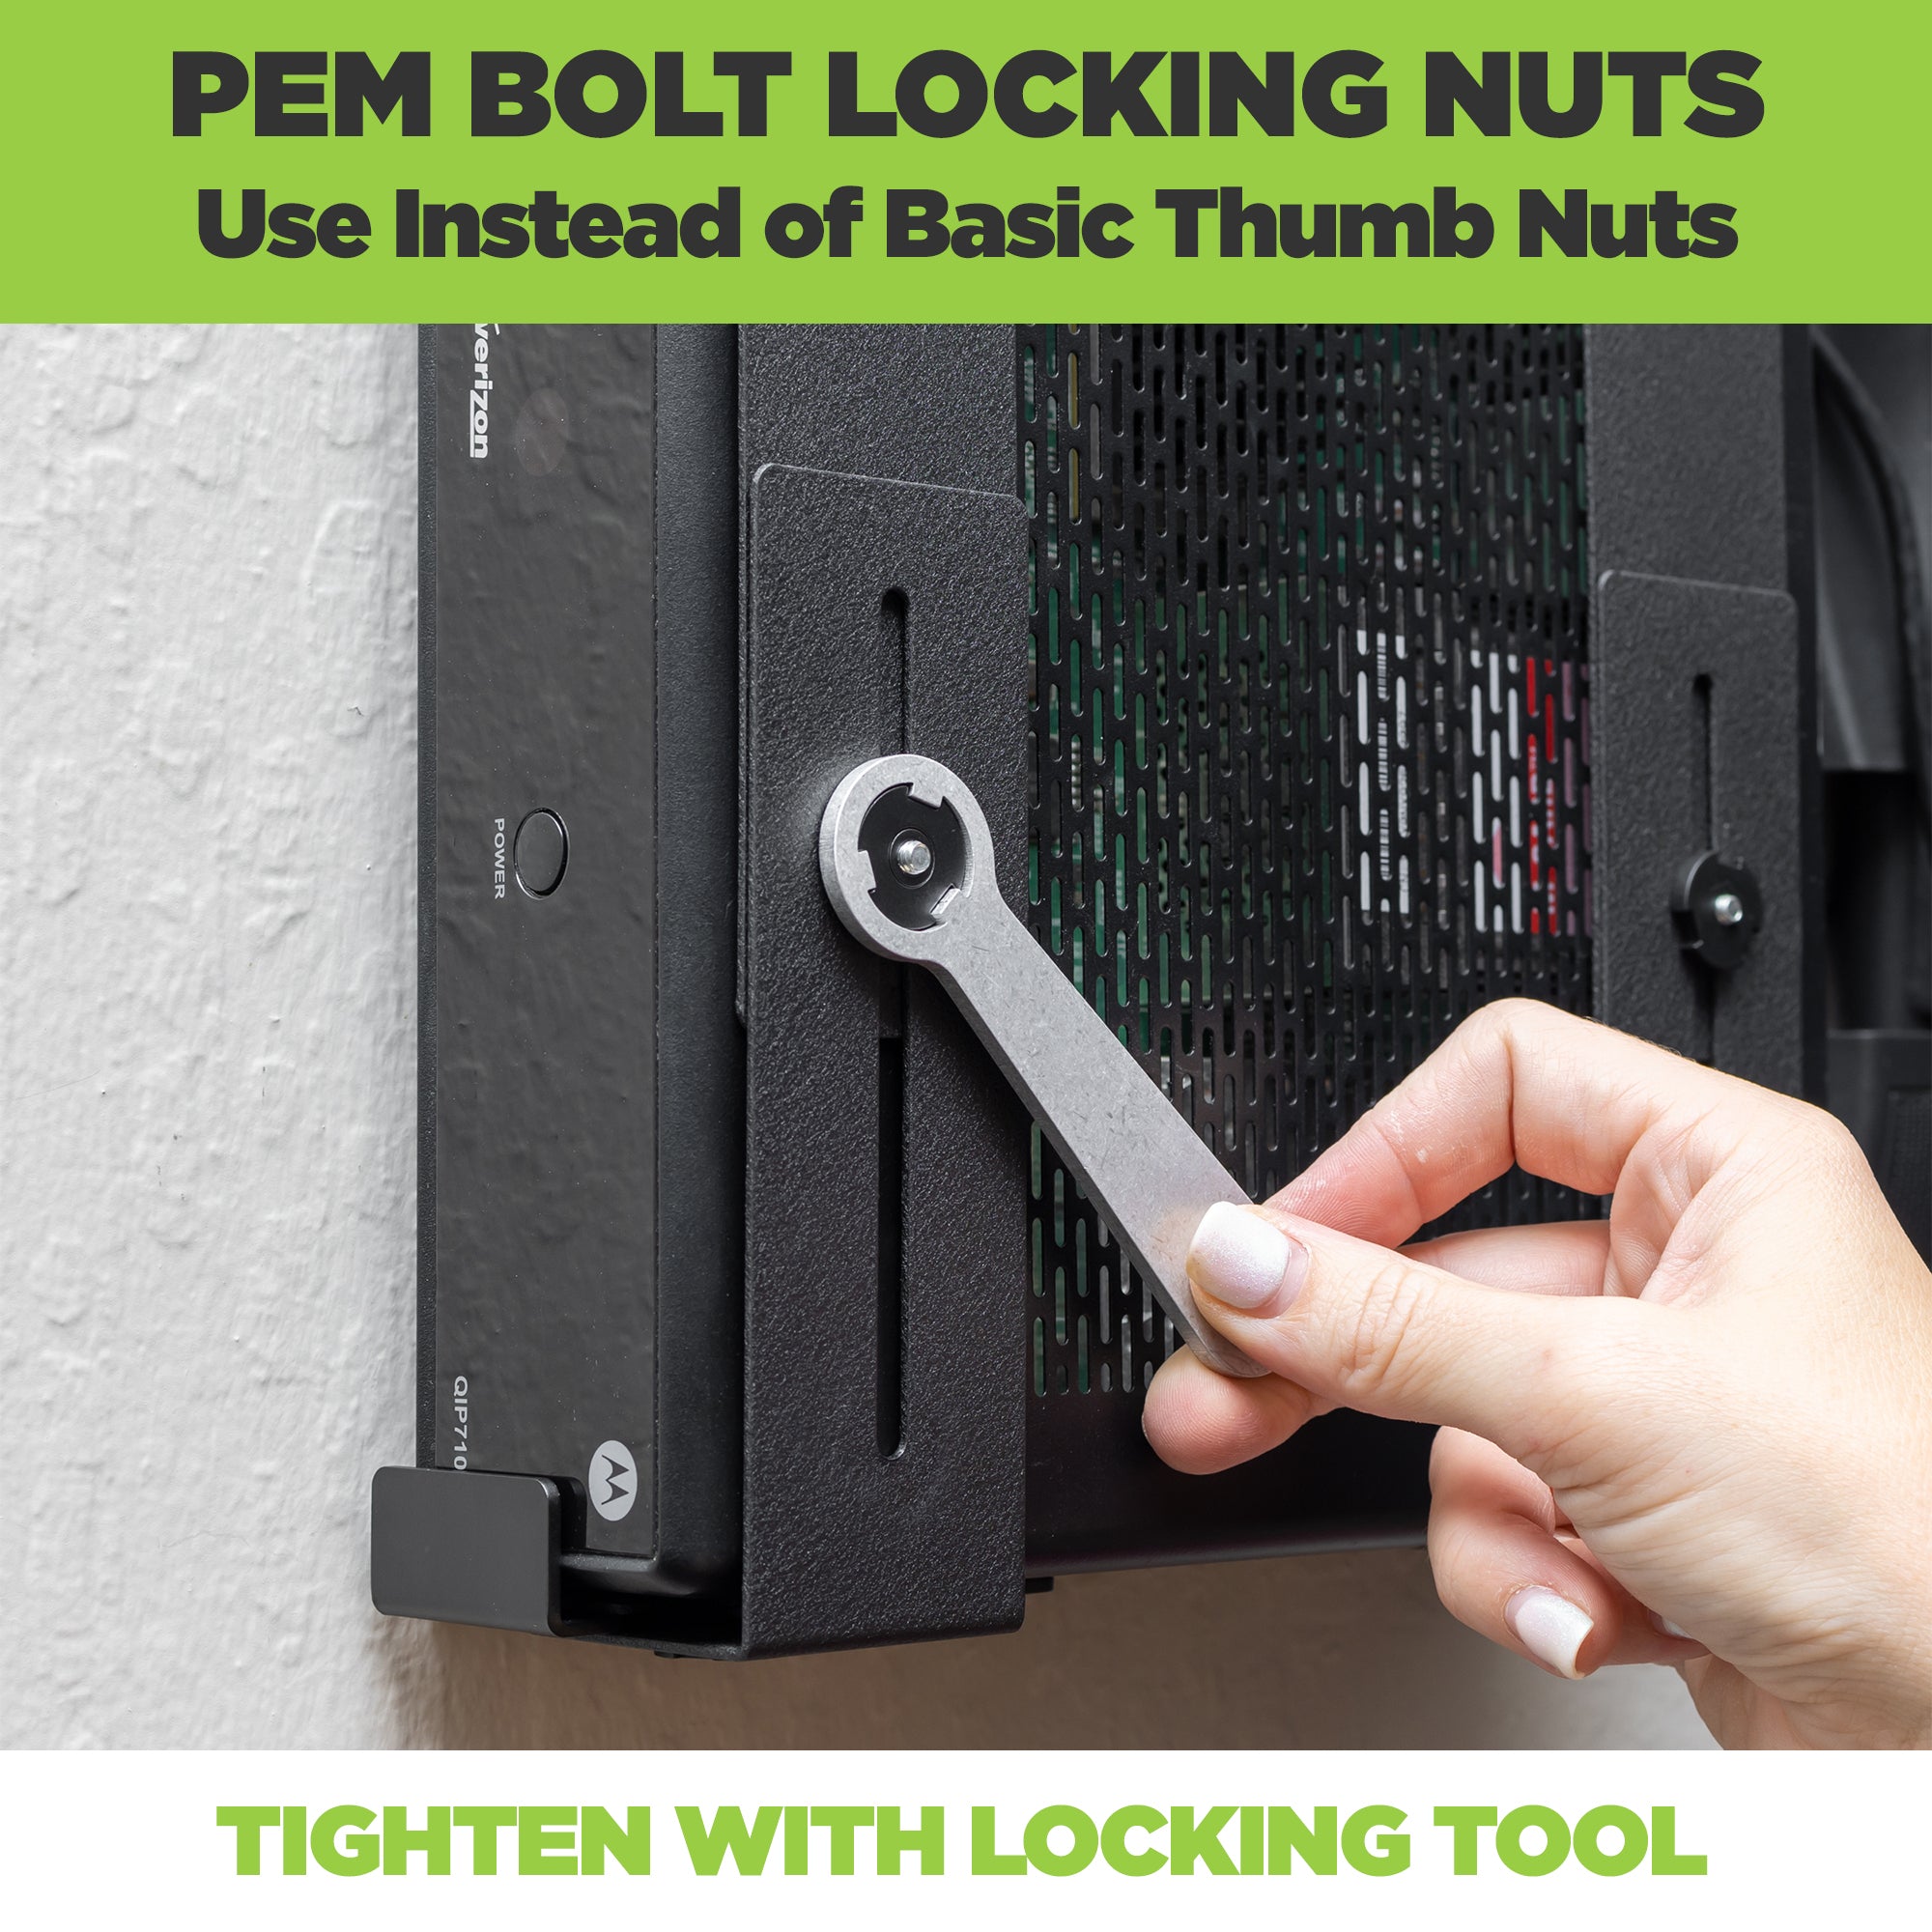 PEM bolt locking nuts and custom locking tool is included with the Theft Deterrent add on. Keep devices safe in public. 